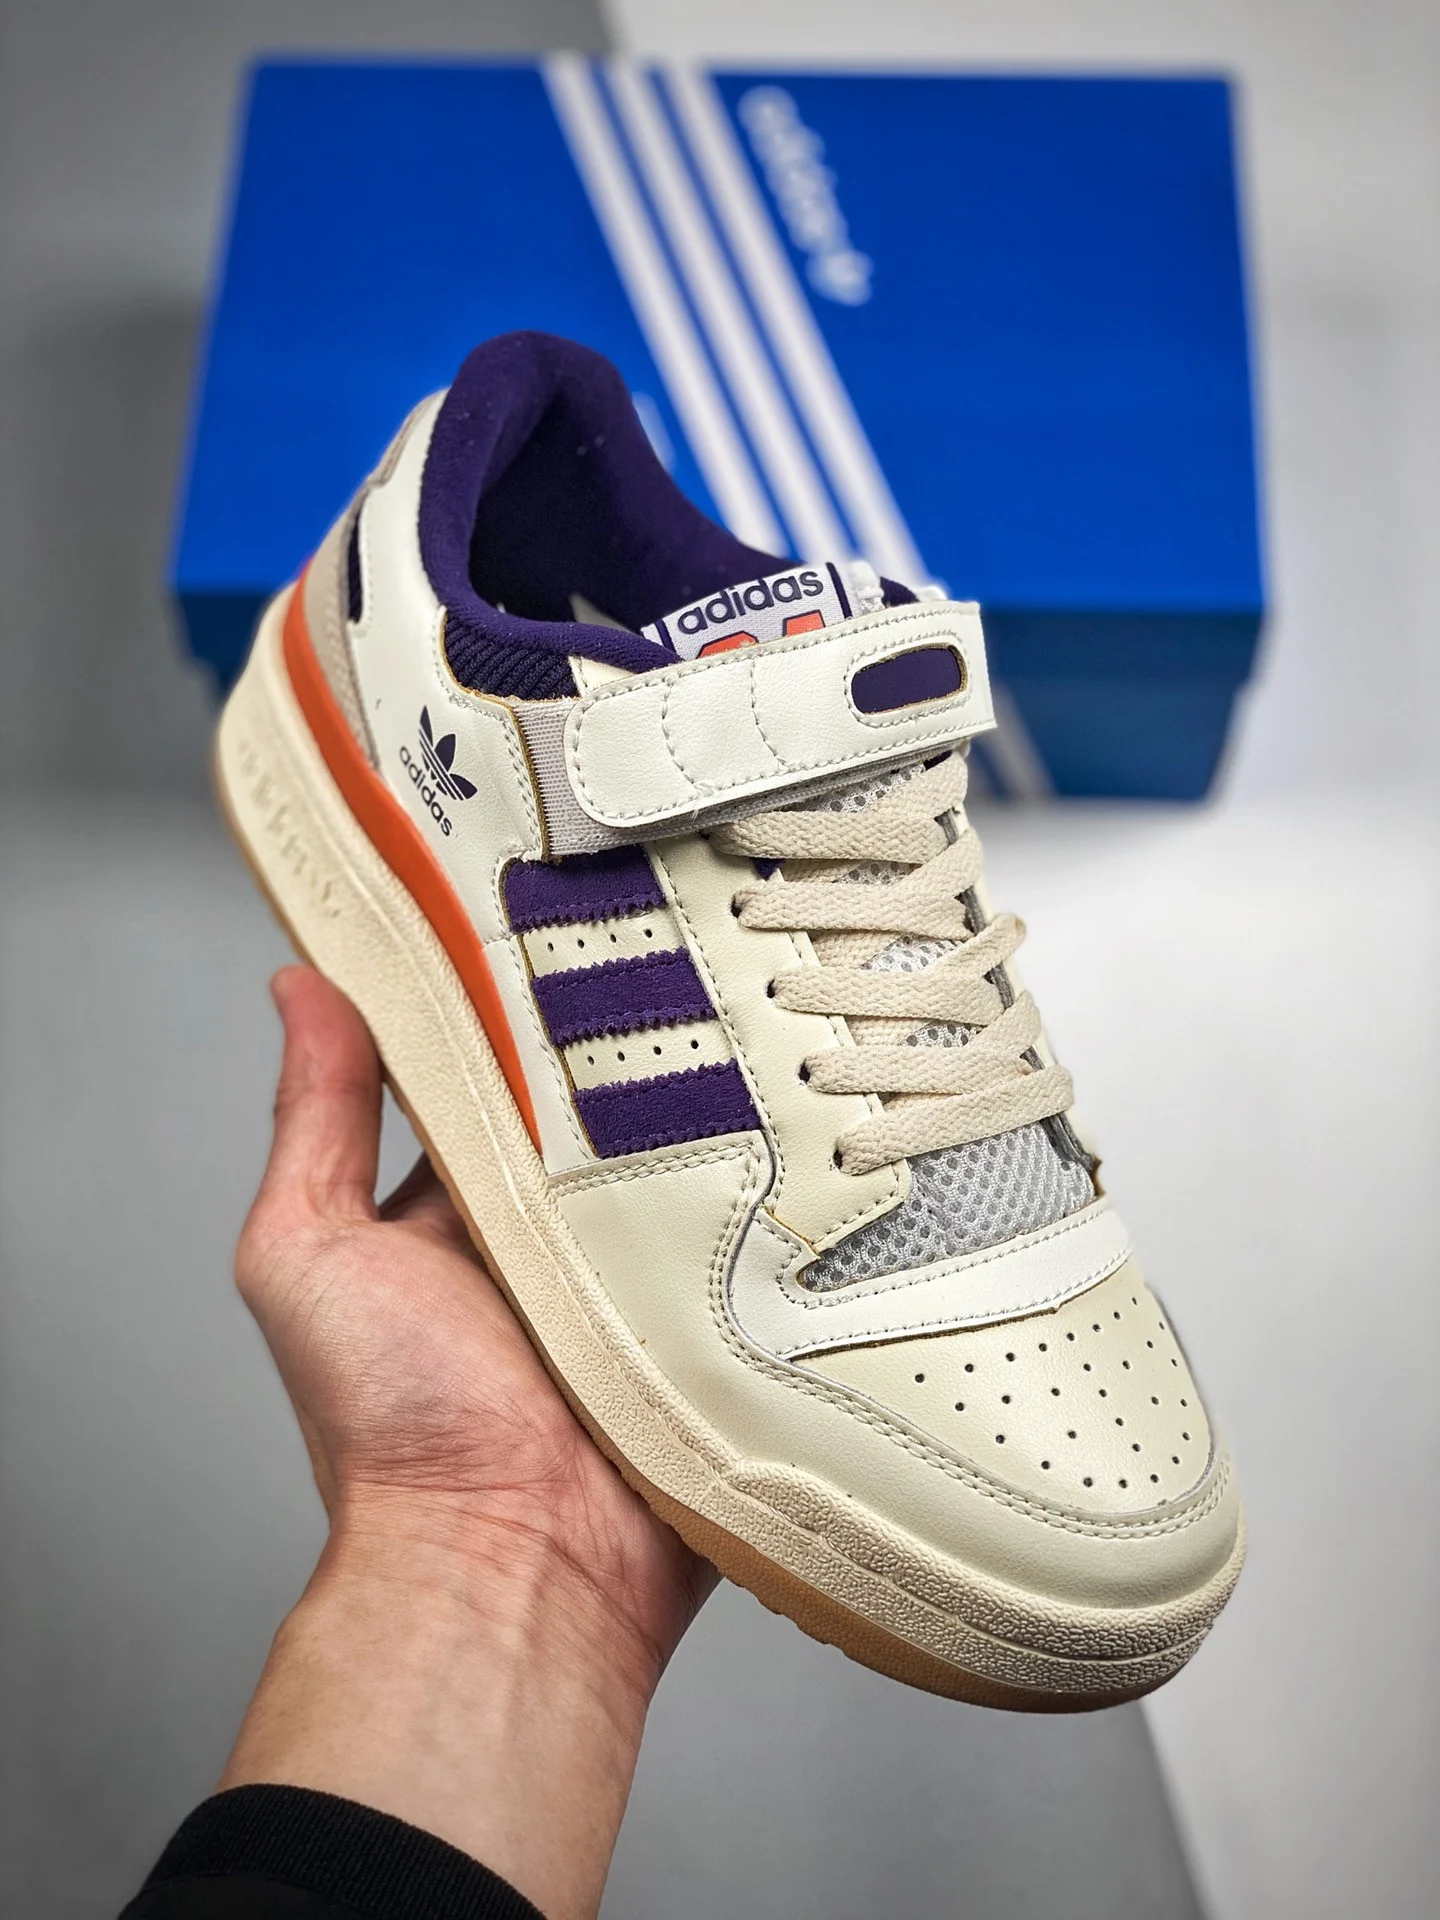 Adidas Forum Low Suns White Purple Gold GX9049 For Sale